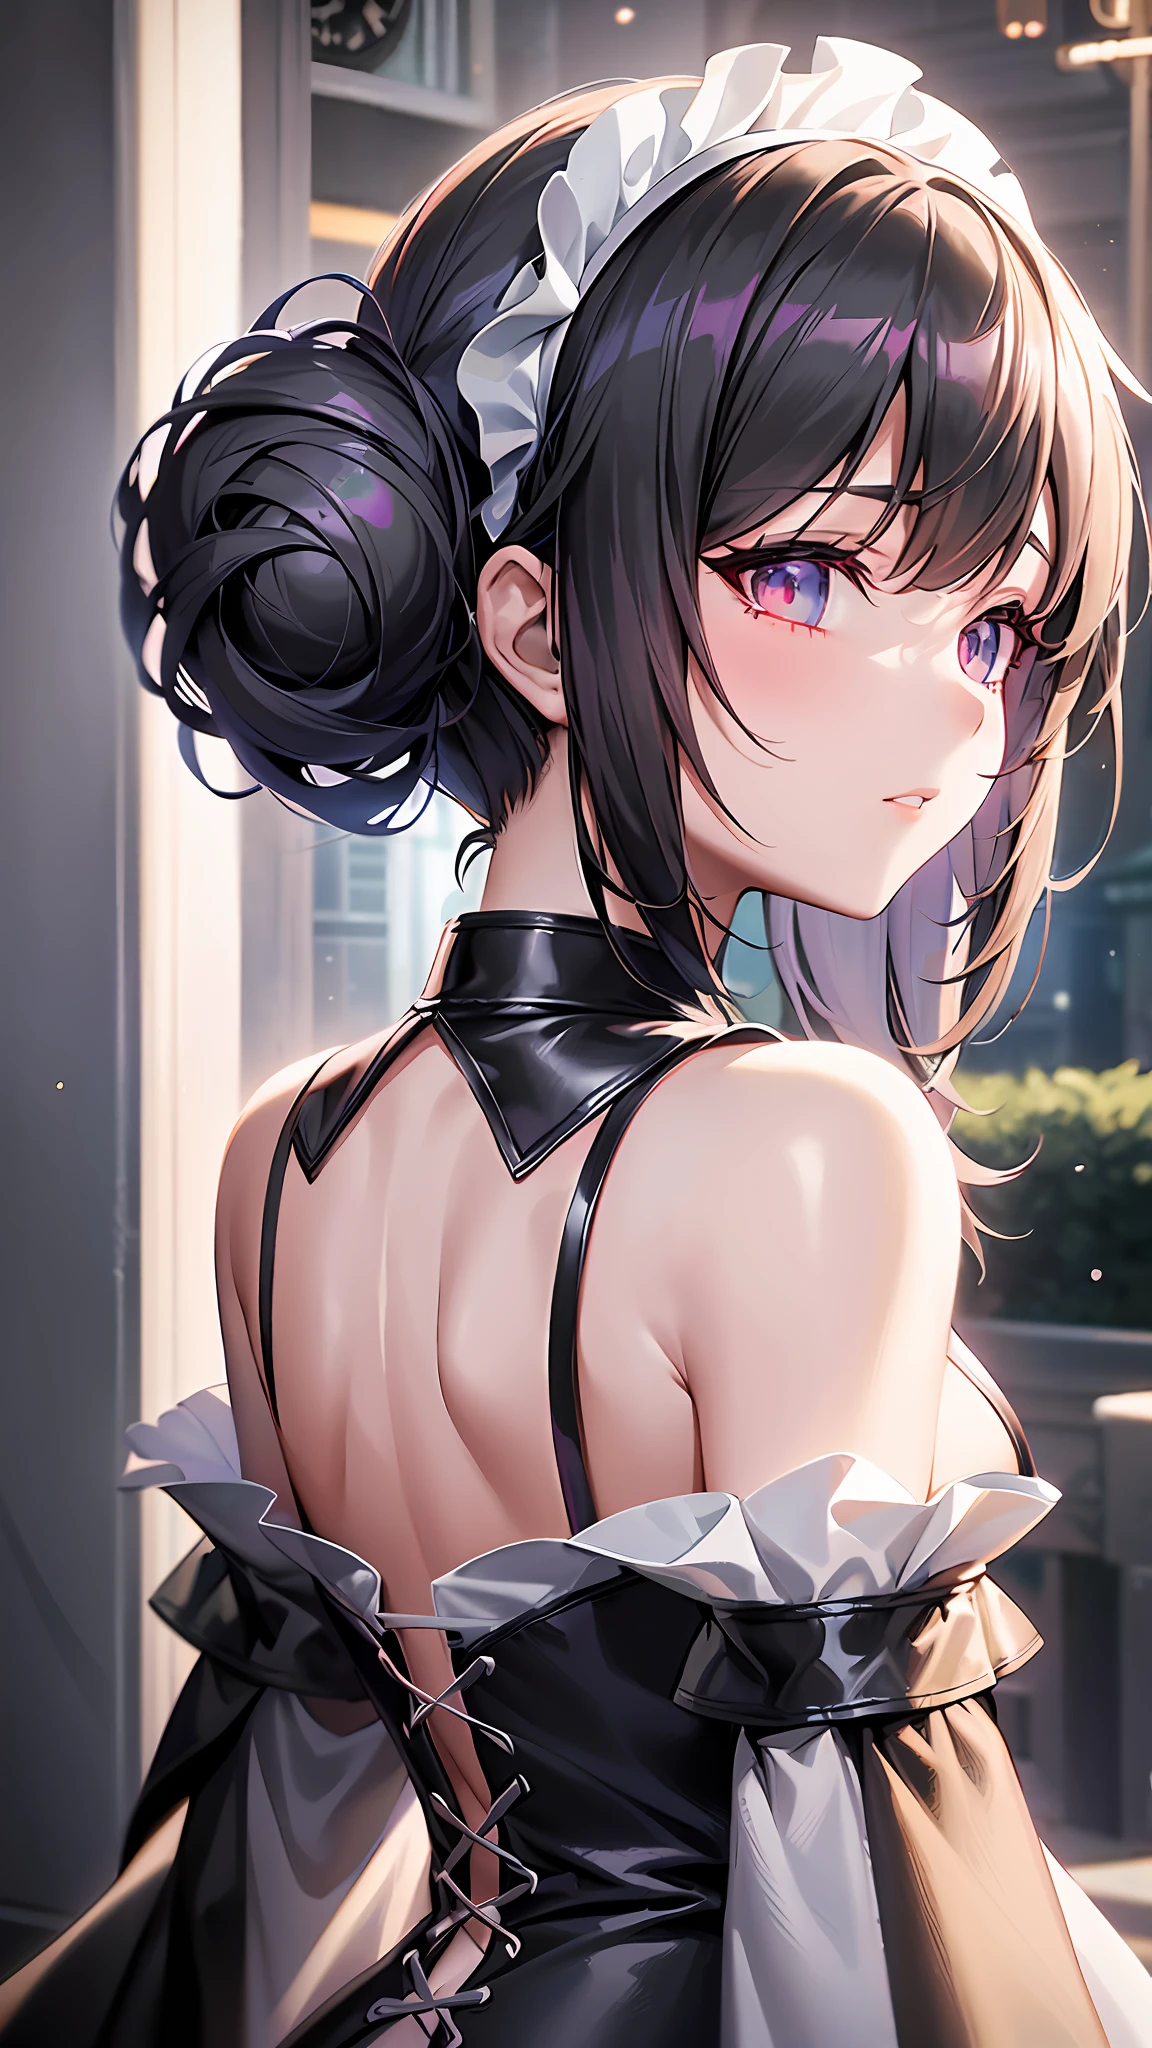 a close up of a woman in a dress with a white and black dress, gothic maiden anime girl, anime girl wearing a black dress, cute anime waifu in a nice dress, anime girl in a maid costume, an elegant gothic princess, guweiz, guweiz on pixiv artstation, guweiz on artstation pixiv, beautiful anime girl